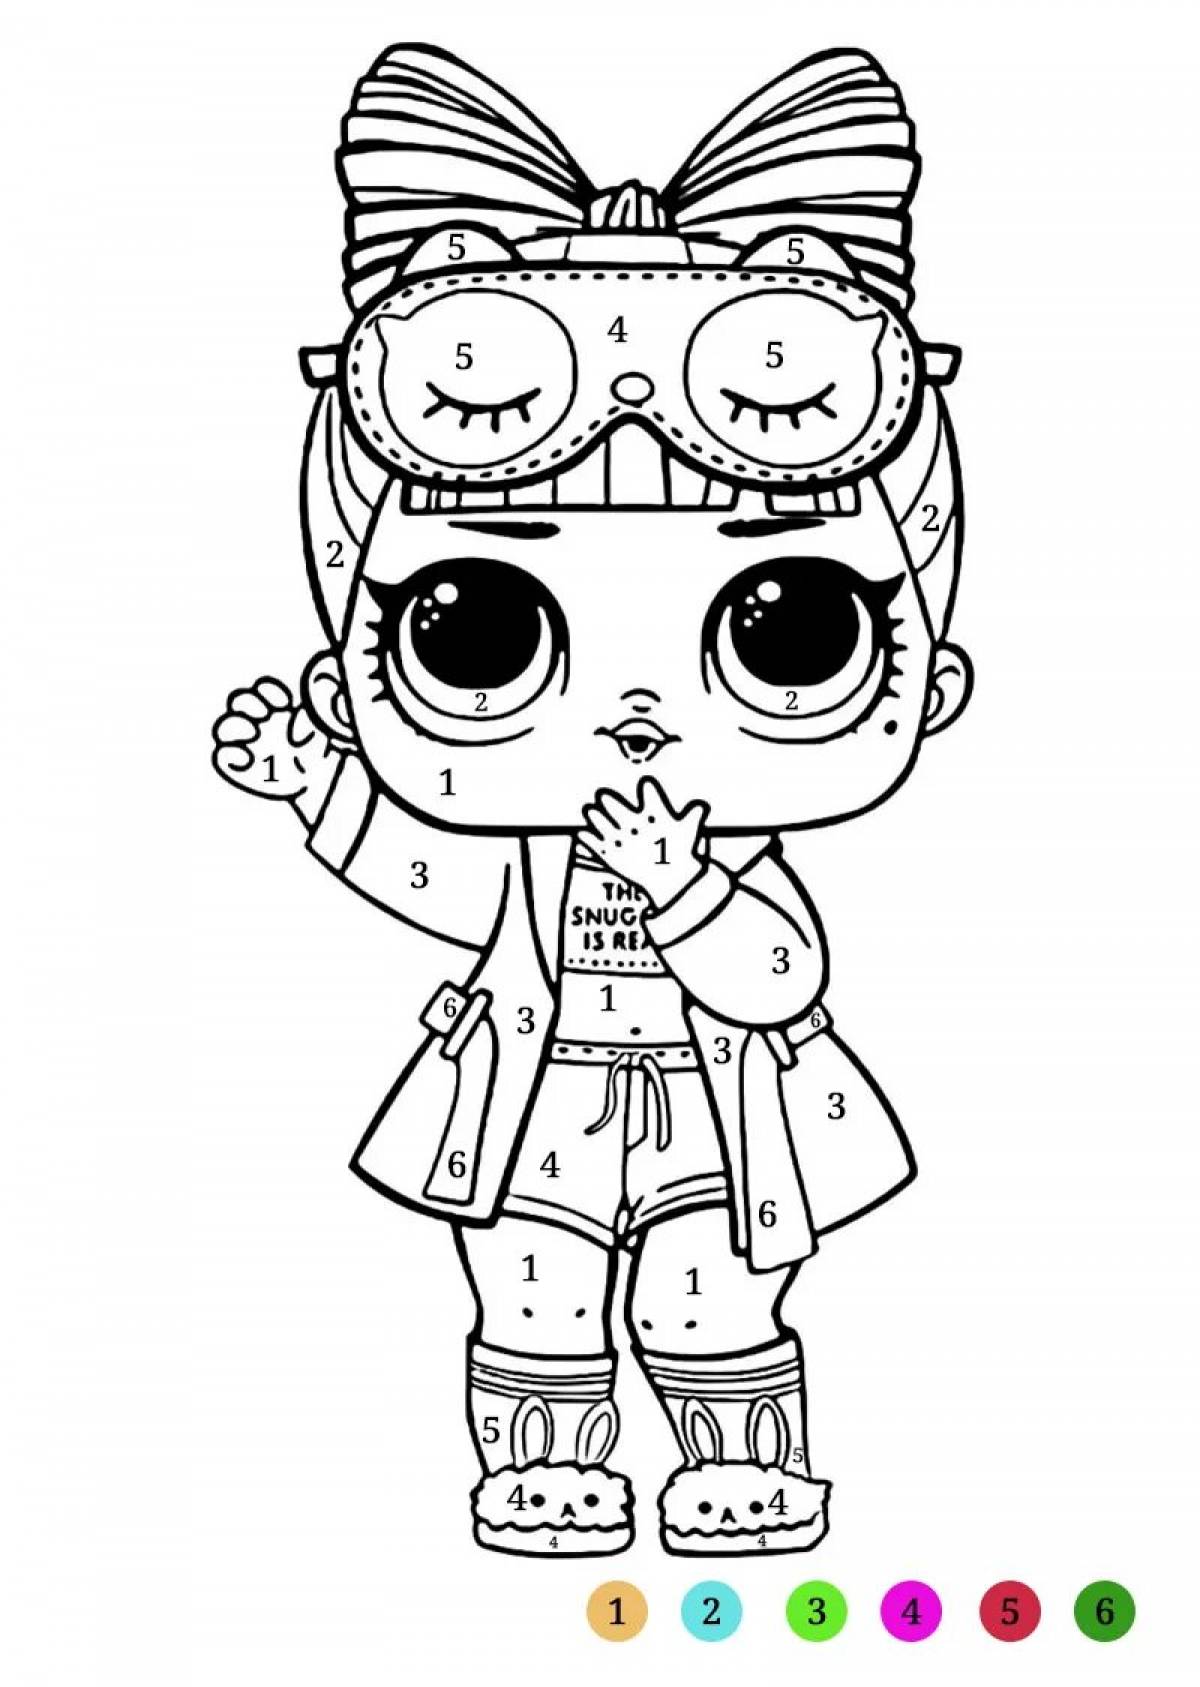 Cute coloring pages for girls lol dolls